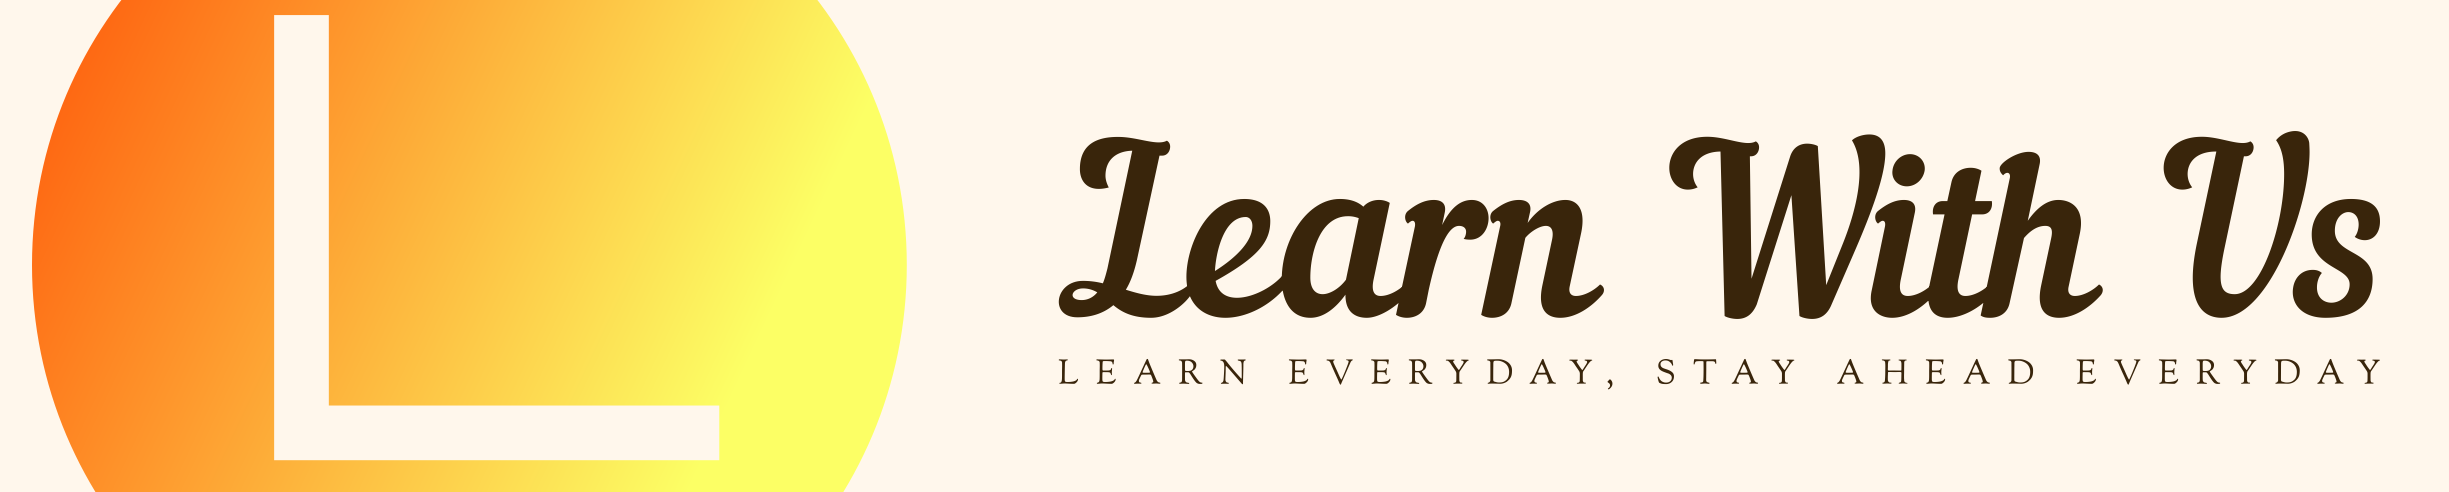 Learn With Us Daily